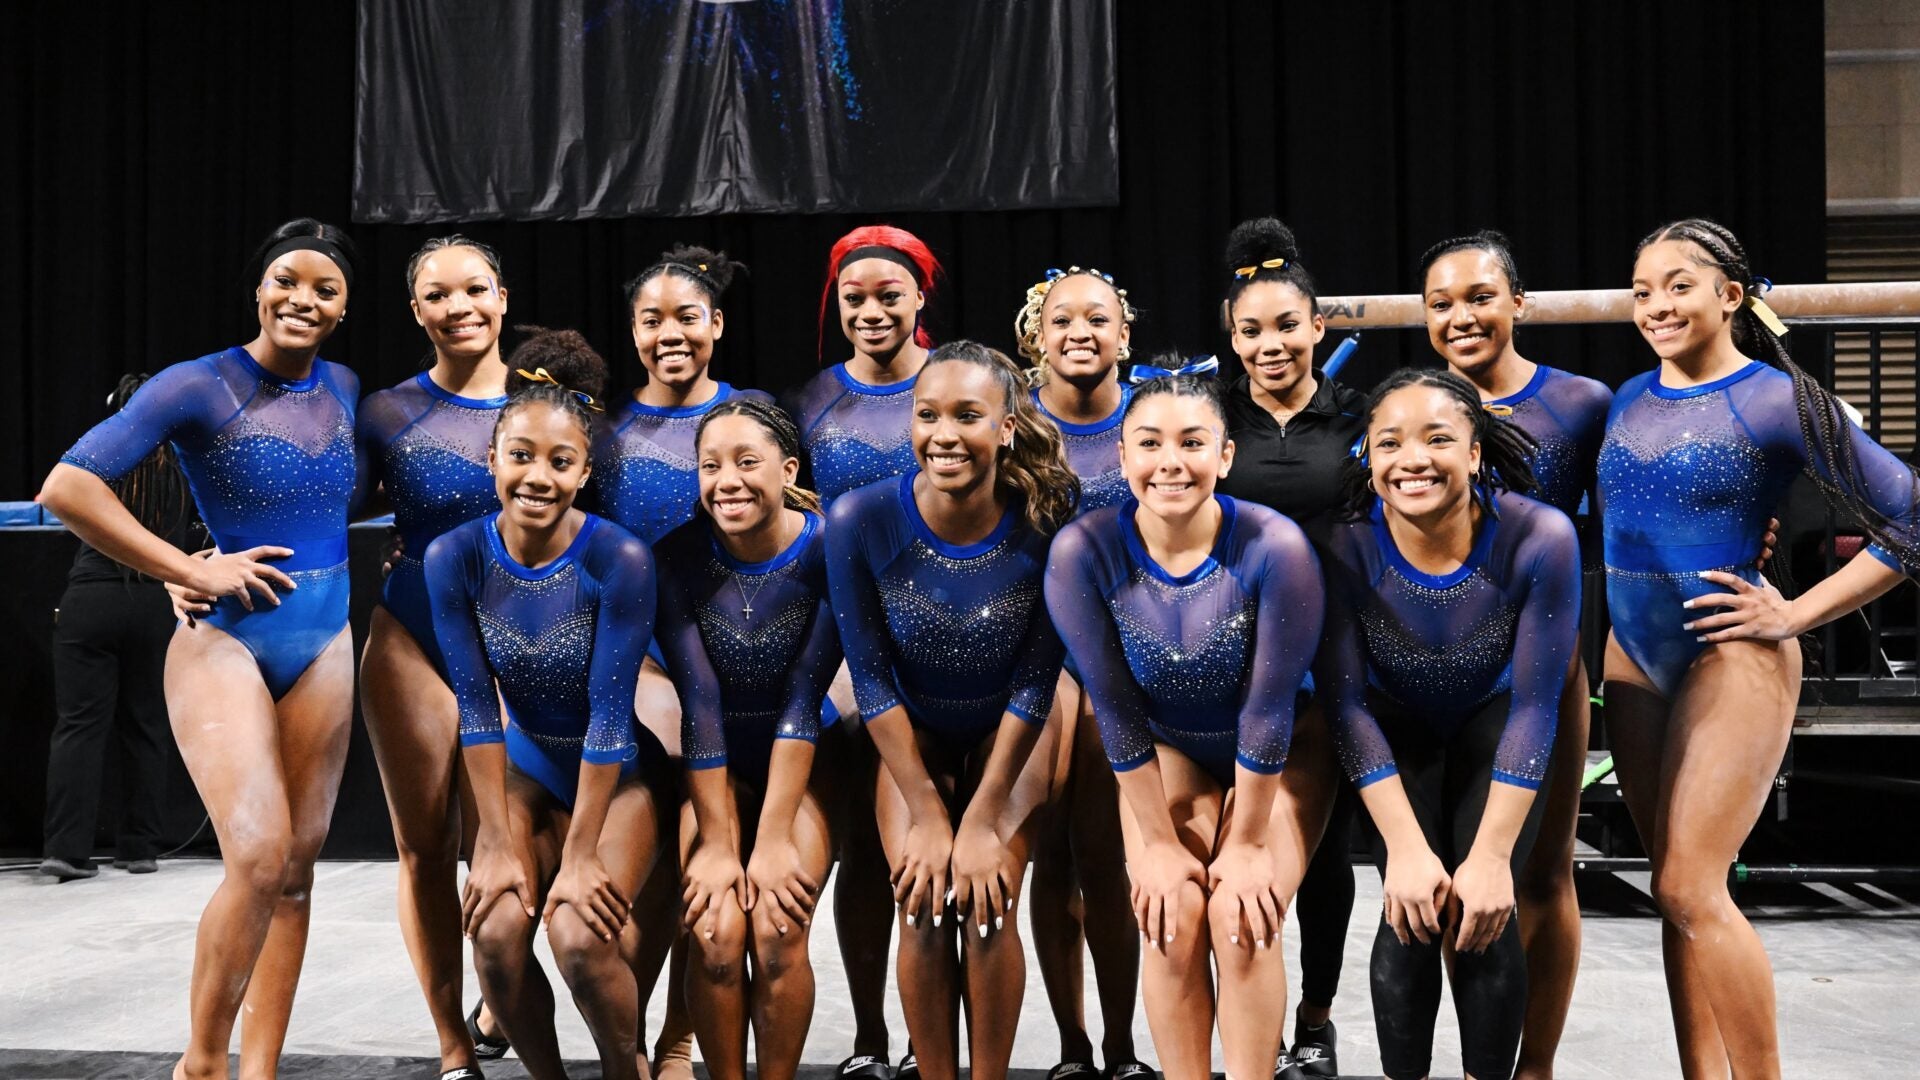 Fisk University Set To Make History Again By Hosting Gymnastics Meet With All Black Women Coaches